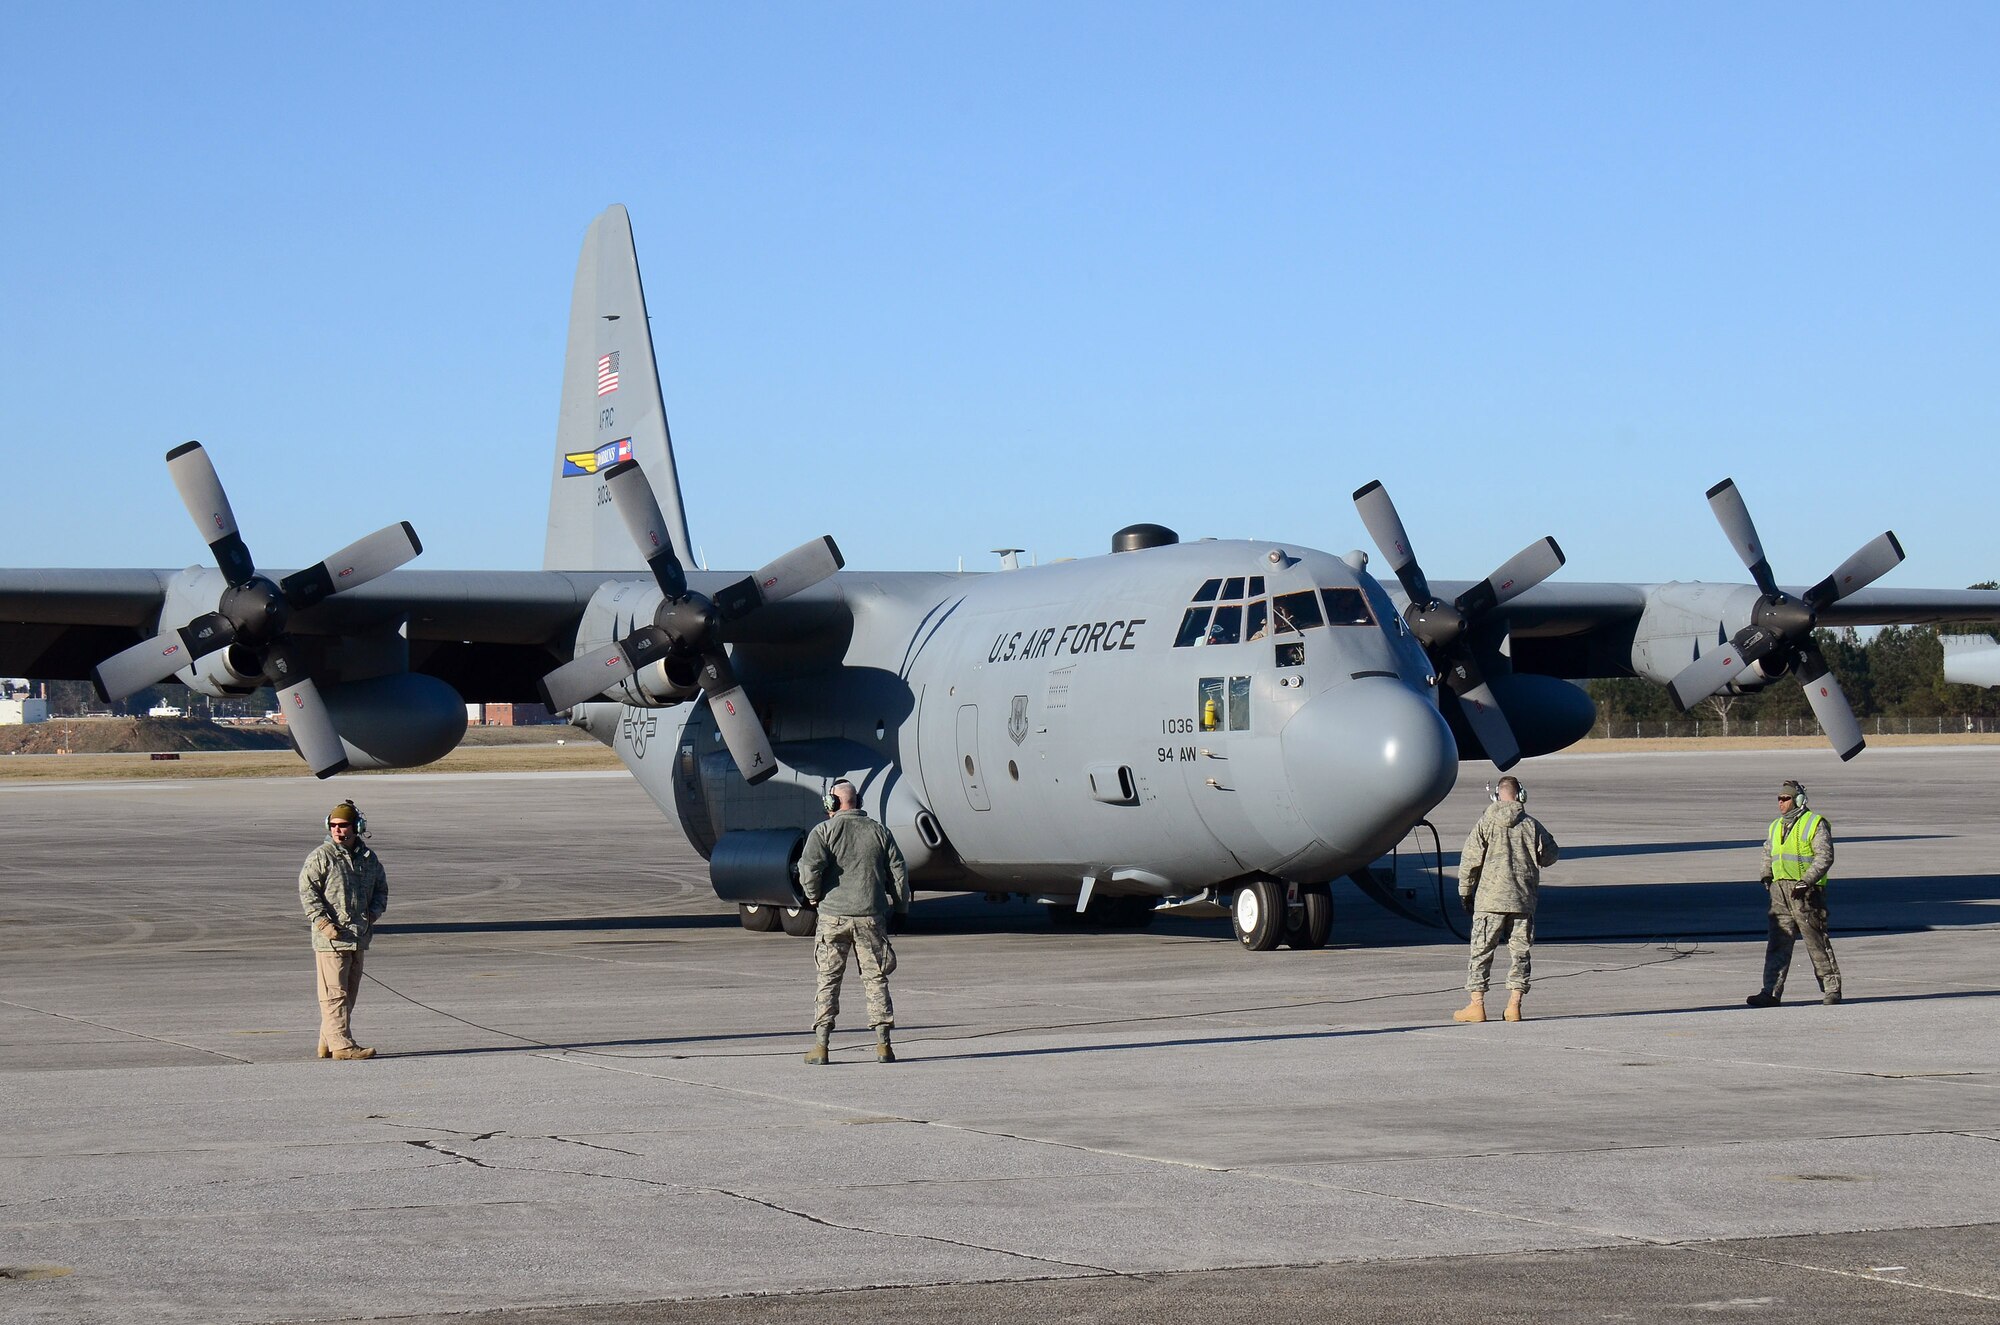 94th Airlift Wing maintenance personnel stand by to monitor engines start for the C-130H aircraft. The aircraft is being readied for deployment to Southwest Asia, Jan. 8, 2015 at Dobbins Air Reserve Base, Ga.  (U.S. Air Force photo/Brad Fallin)